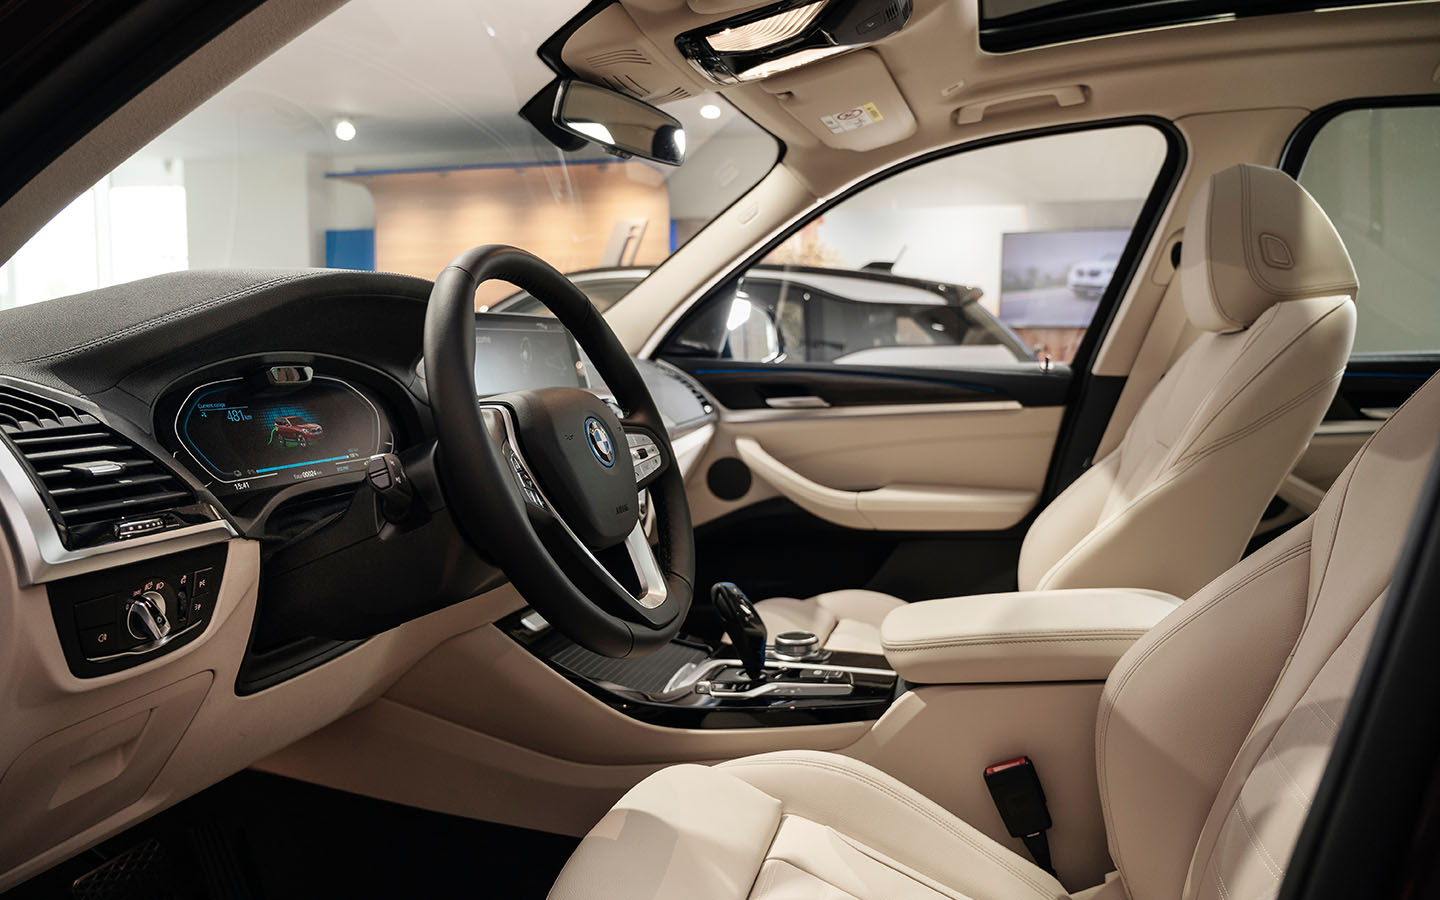 with bmw shy tech, hidden speakers are placed throughout the interior